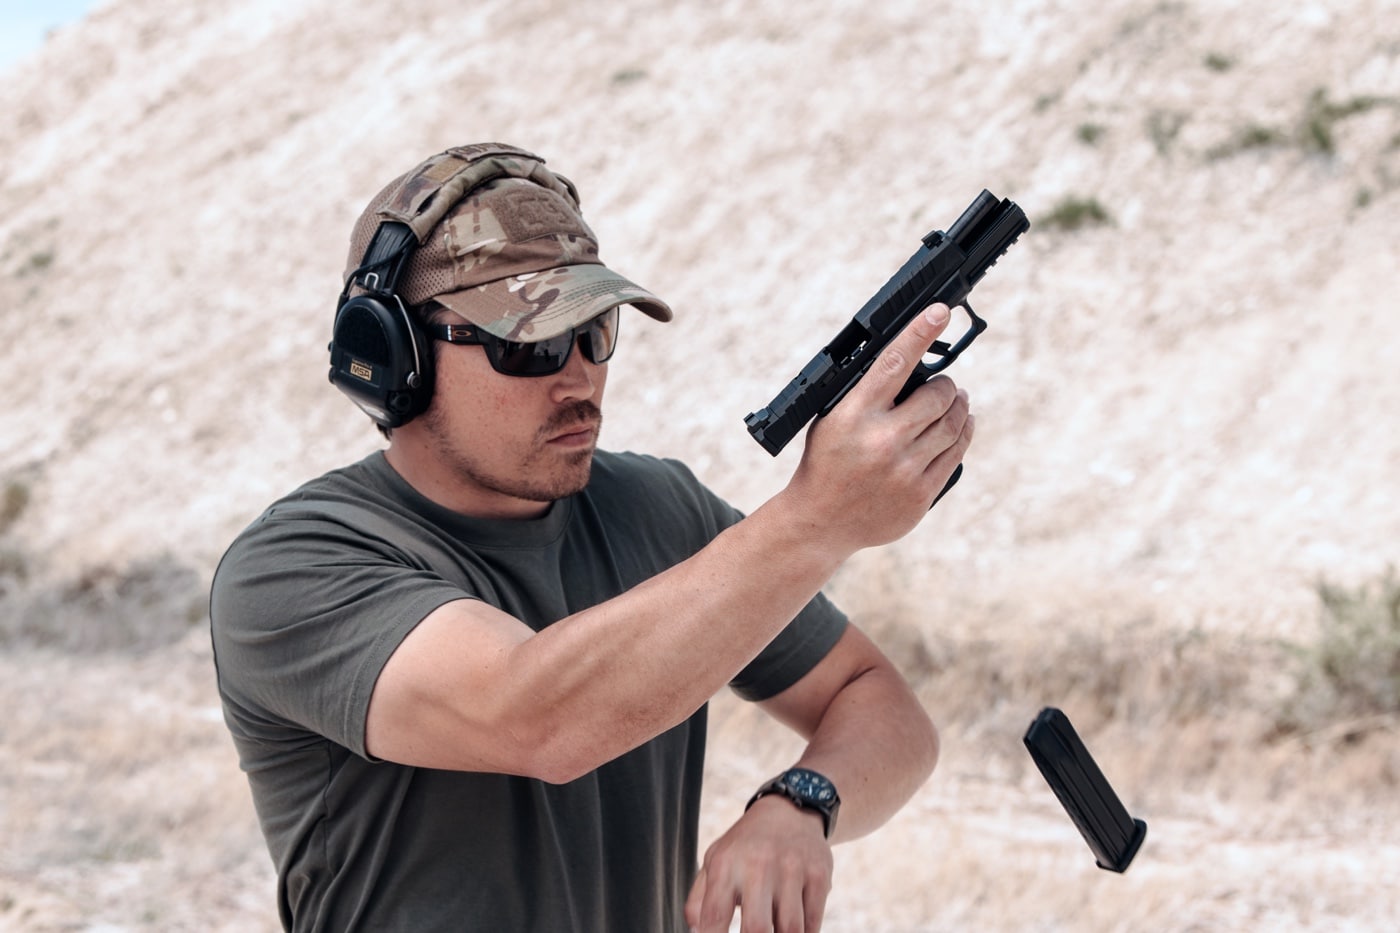 In this digital photo, we see the shooter reloading a Springfield Armory Echelon 9mm pistol.